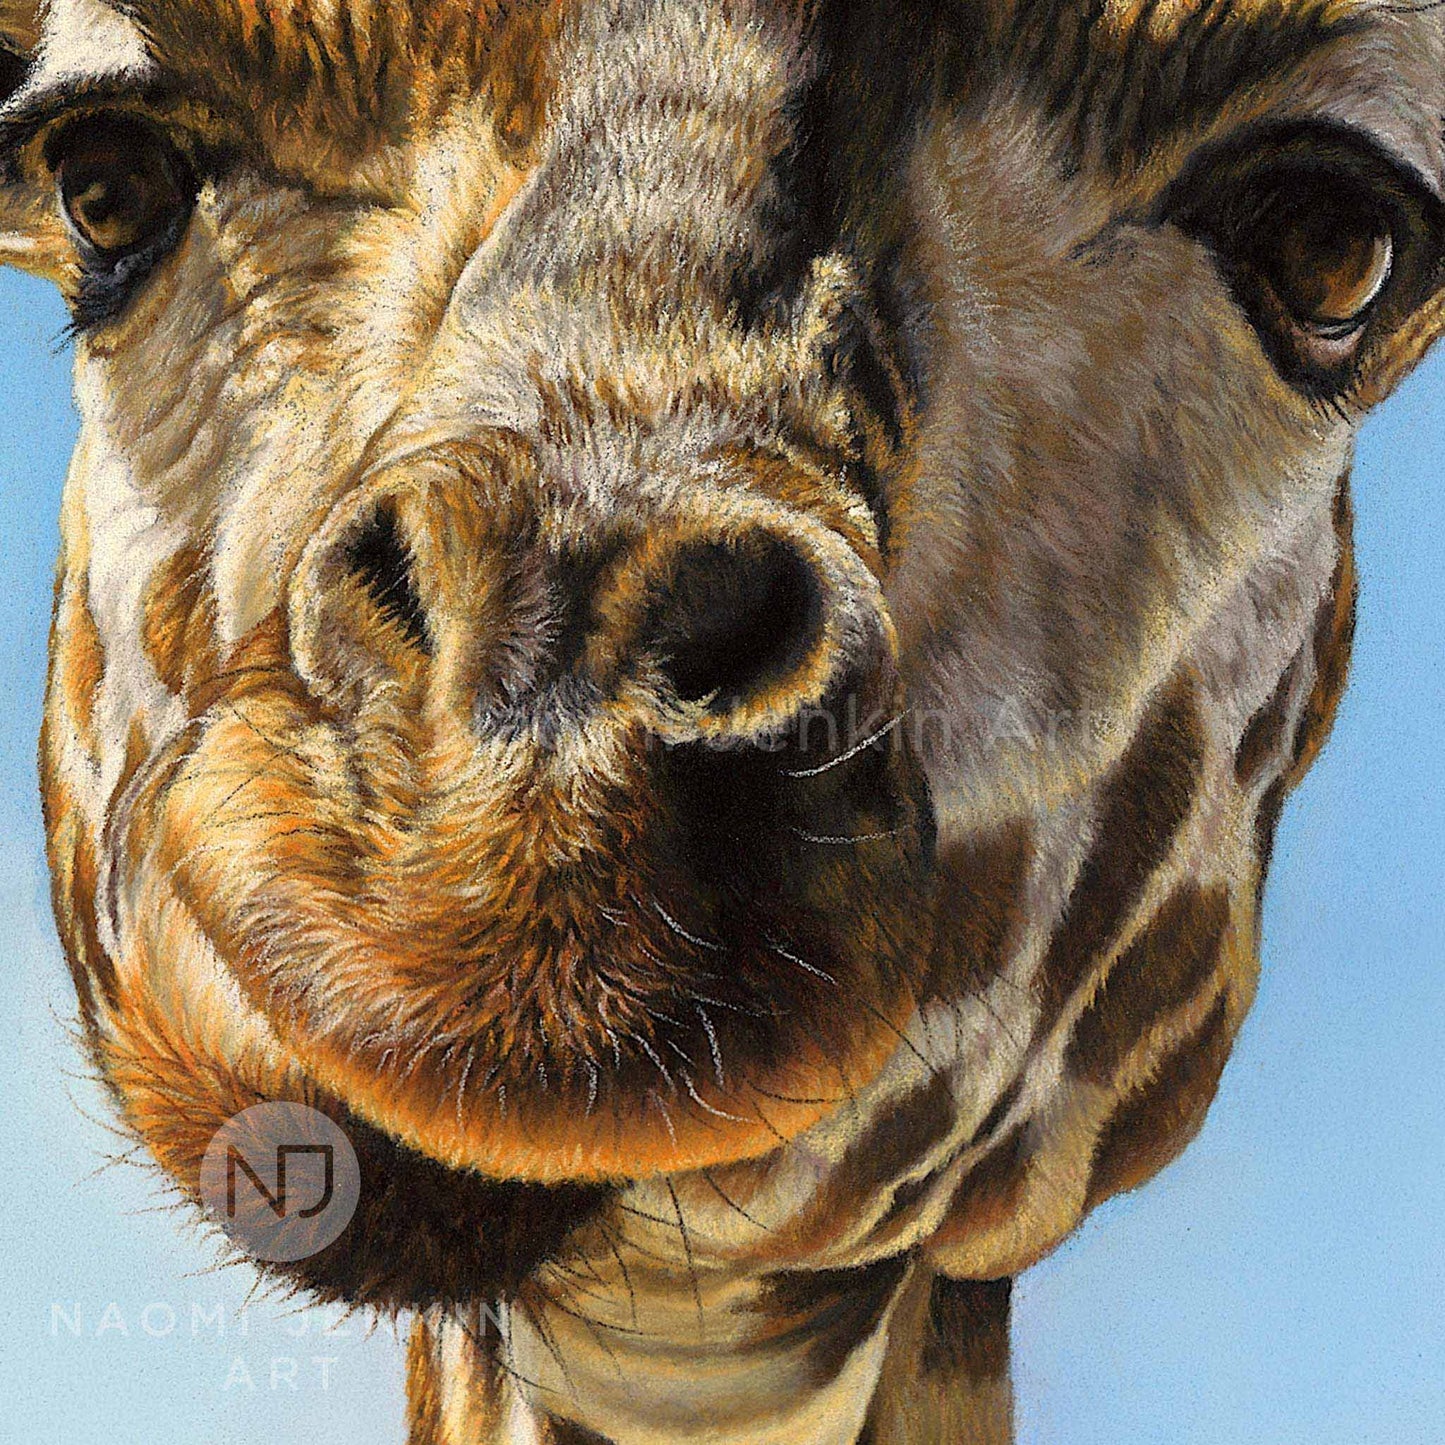 Close up giraffe face detail from the original ' Neck and Neck' painting by artist Naomi Jenkin